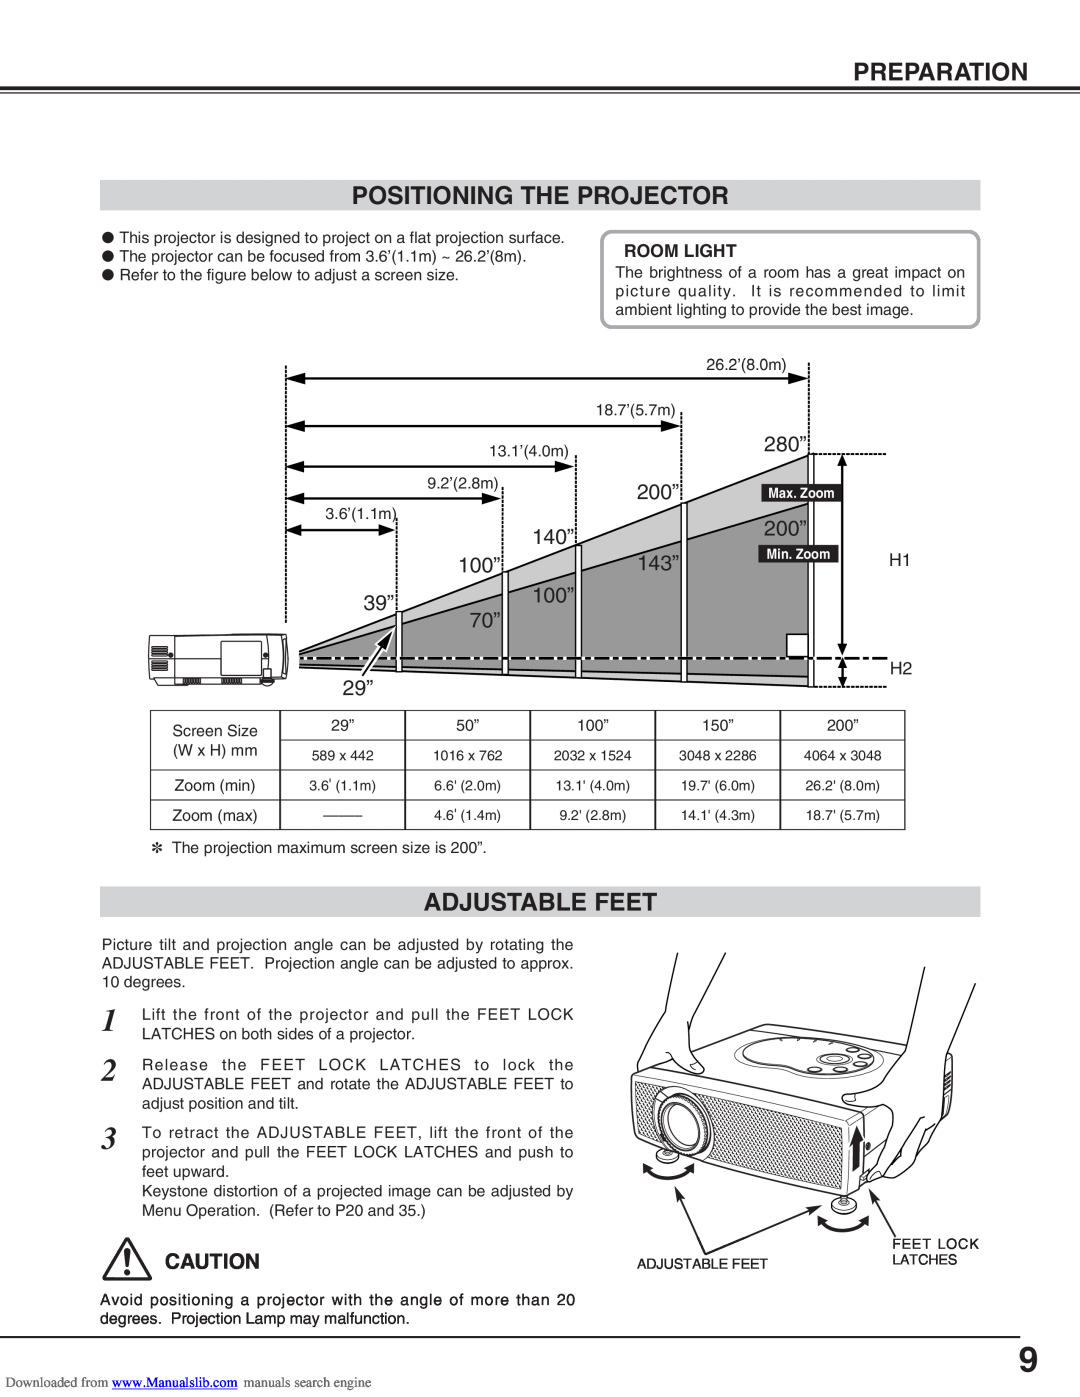 Canon LV-S2 owner manual Preparation Positioning The Projector, Adjustable Feet, Room Light 